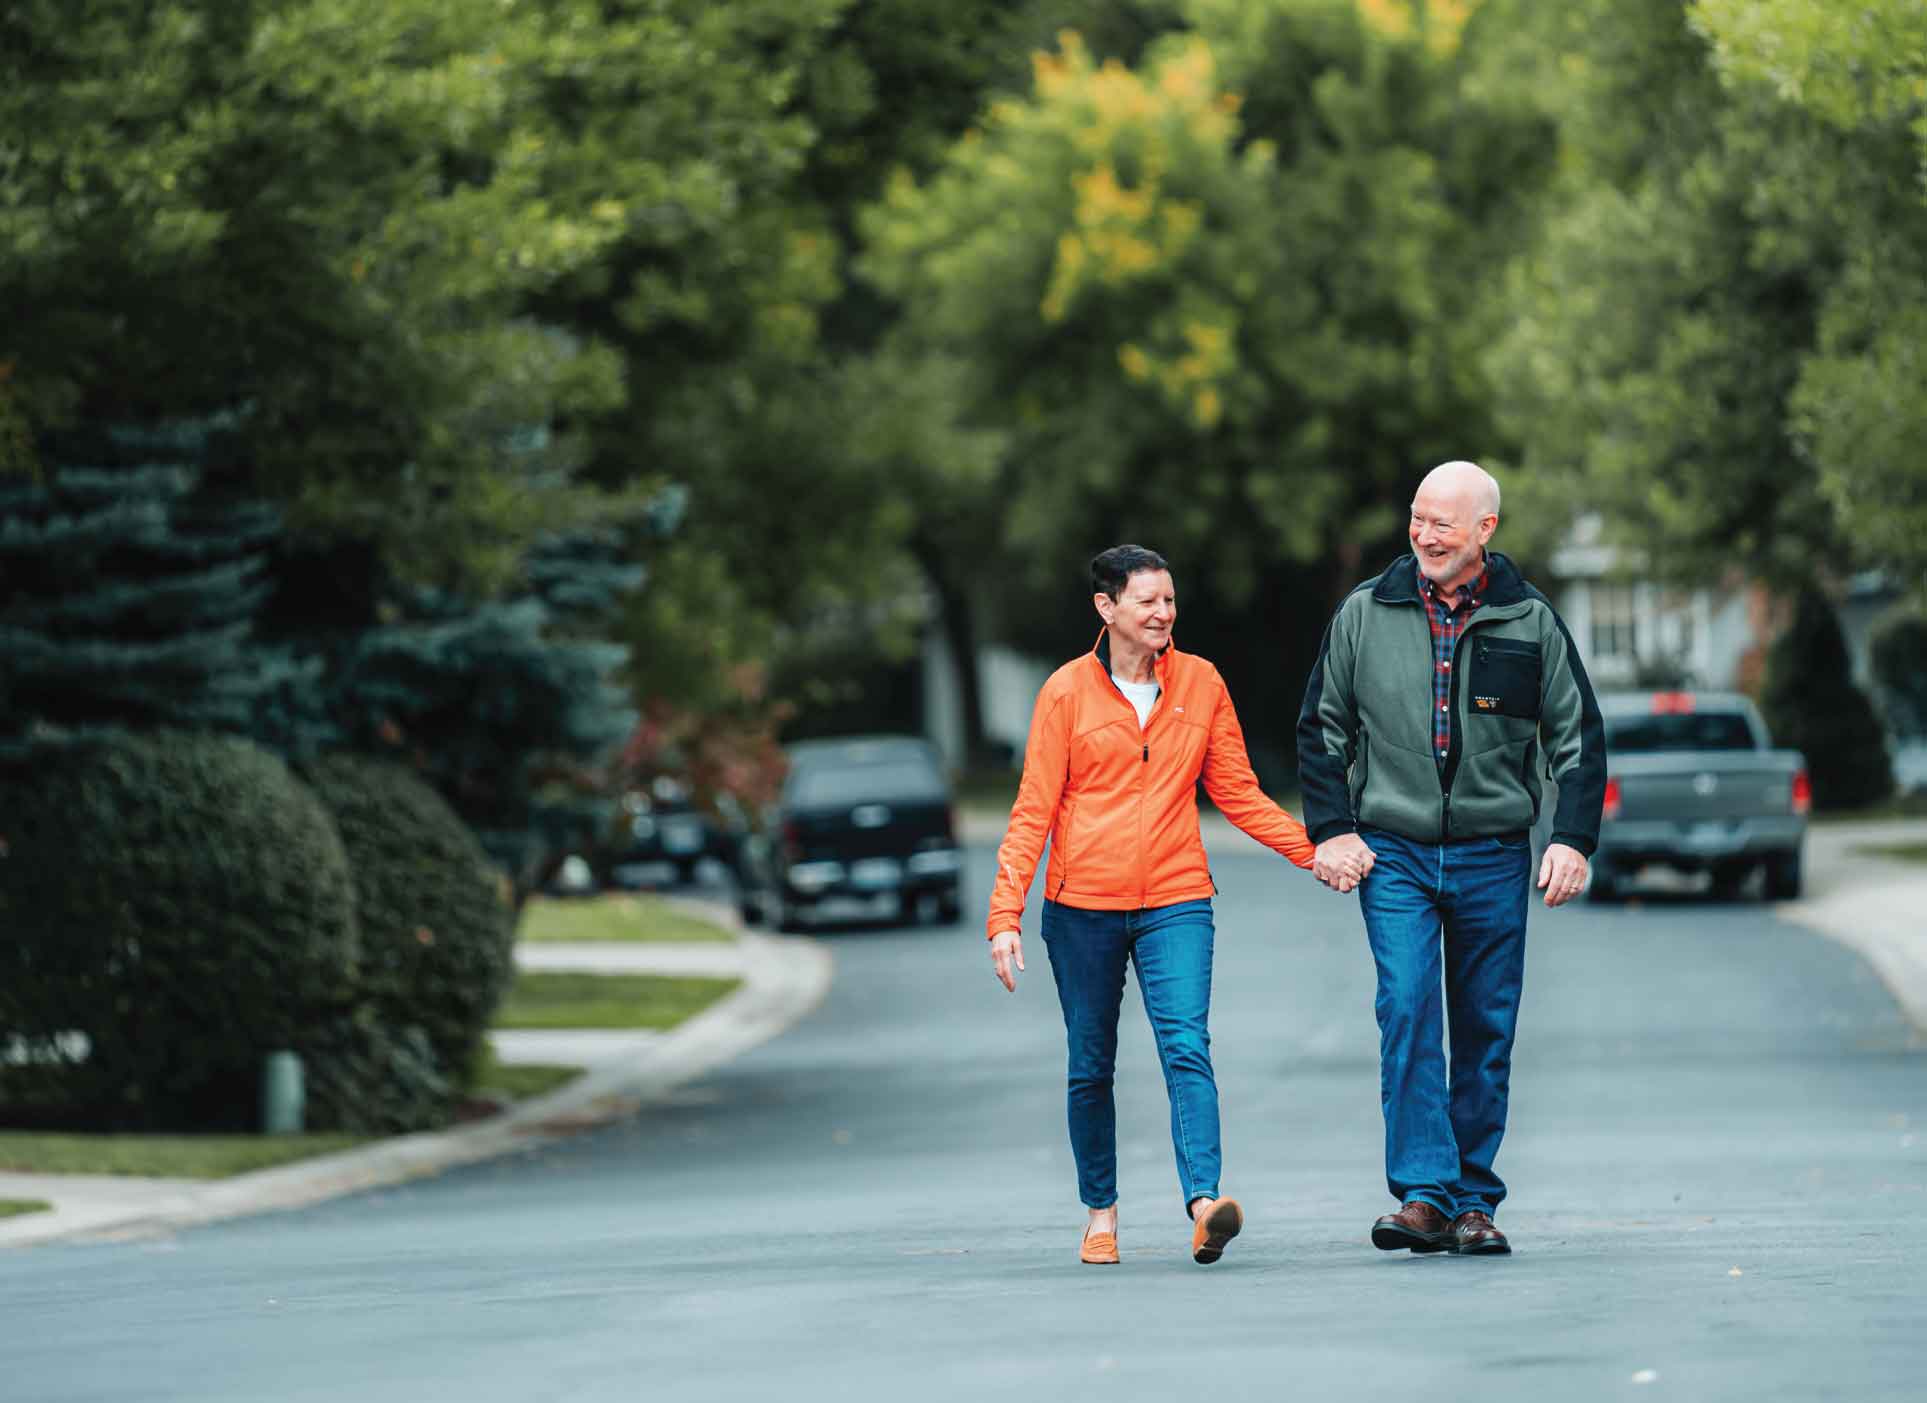 A senior couple walk down a paved road in a wooded area